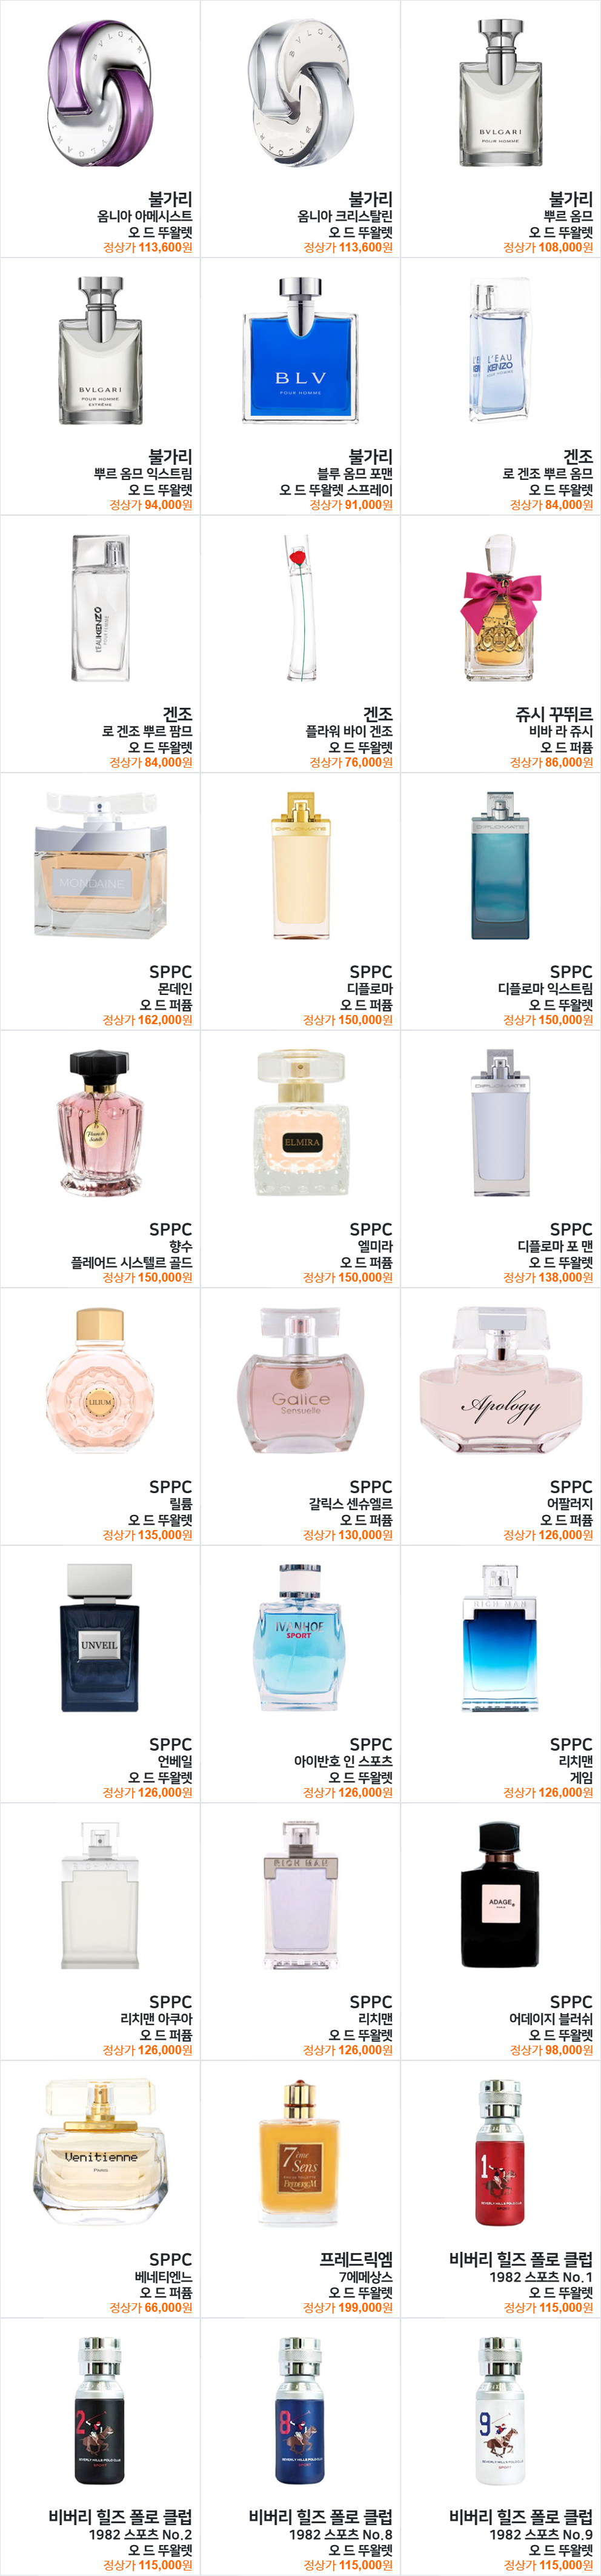 perfumeproduct5.png